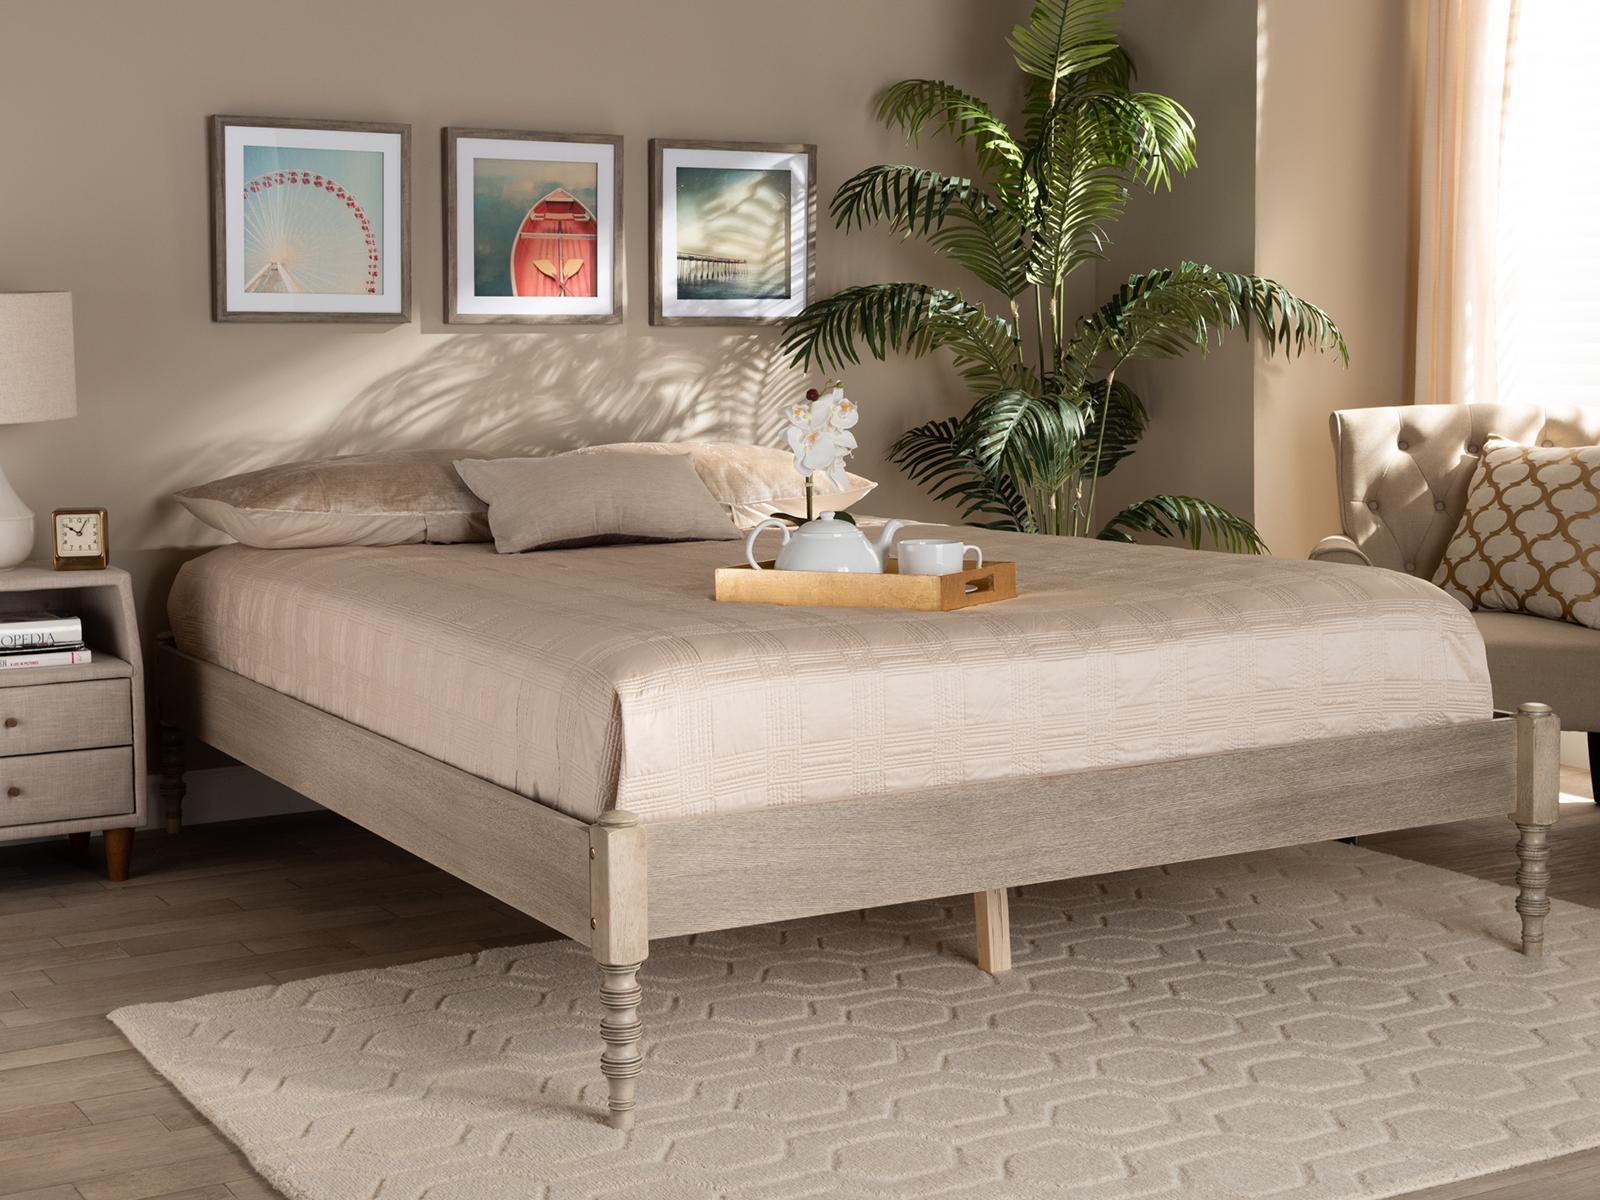 Baxton Studio Wood Platform Bed | Queen | Cielle French Bohemian | White